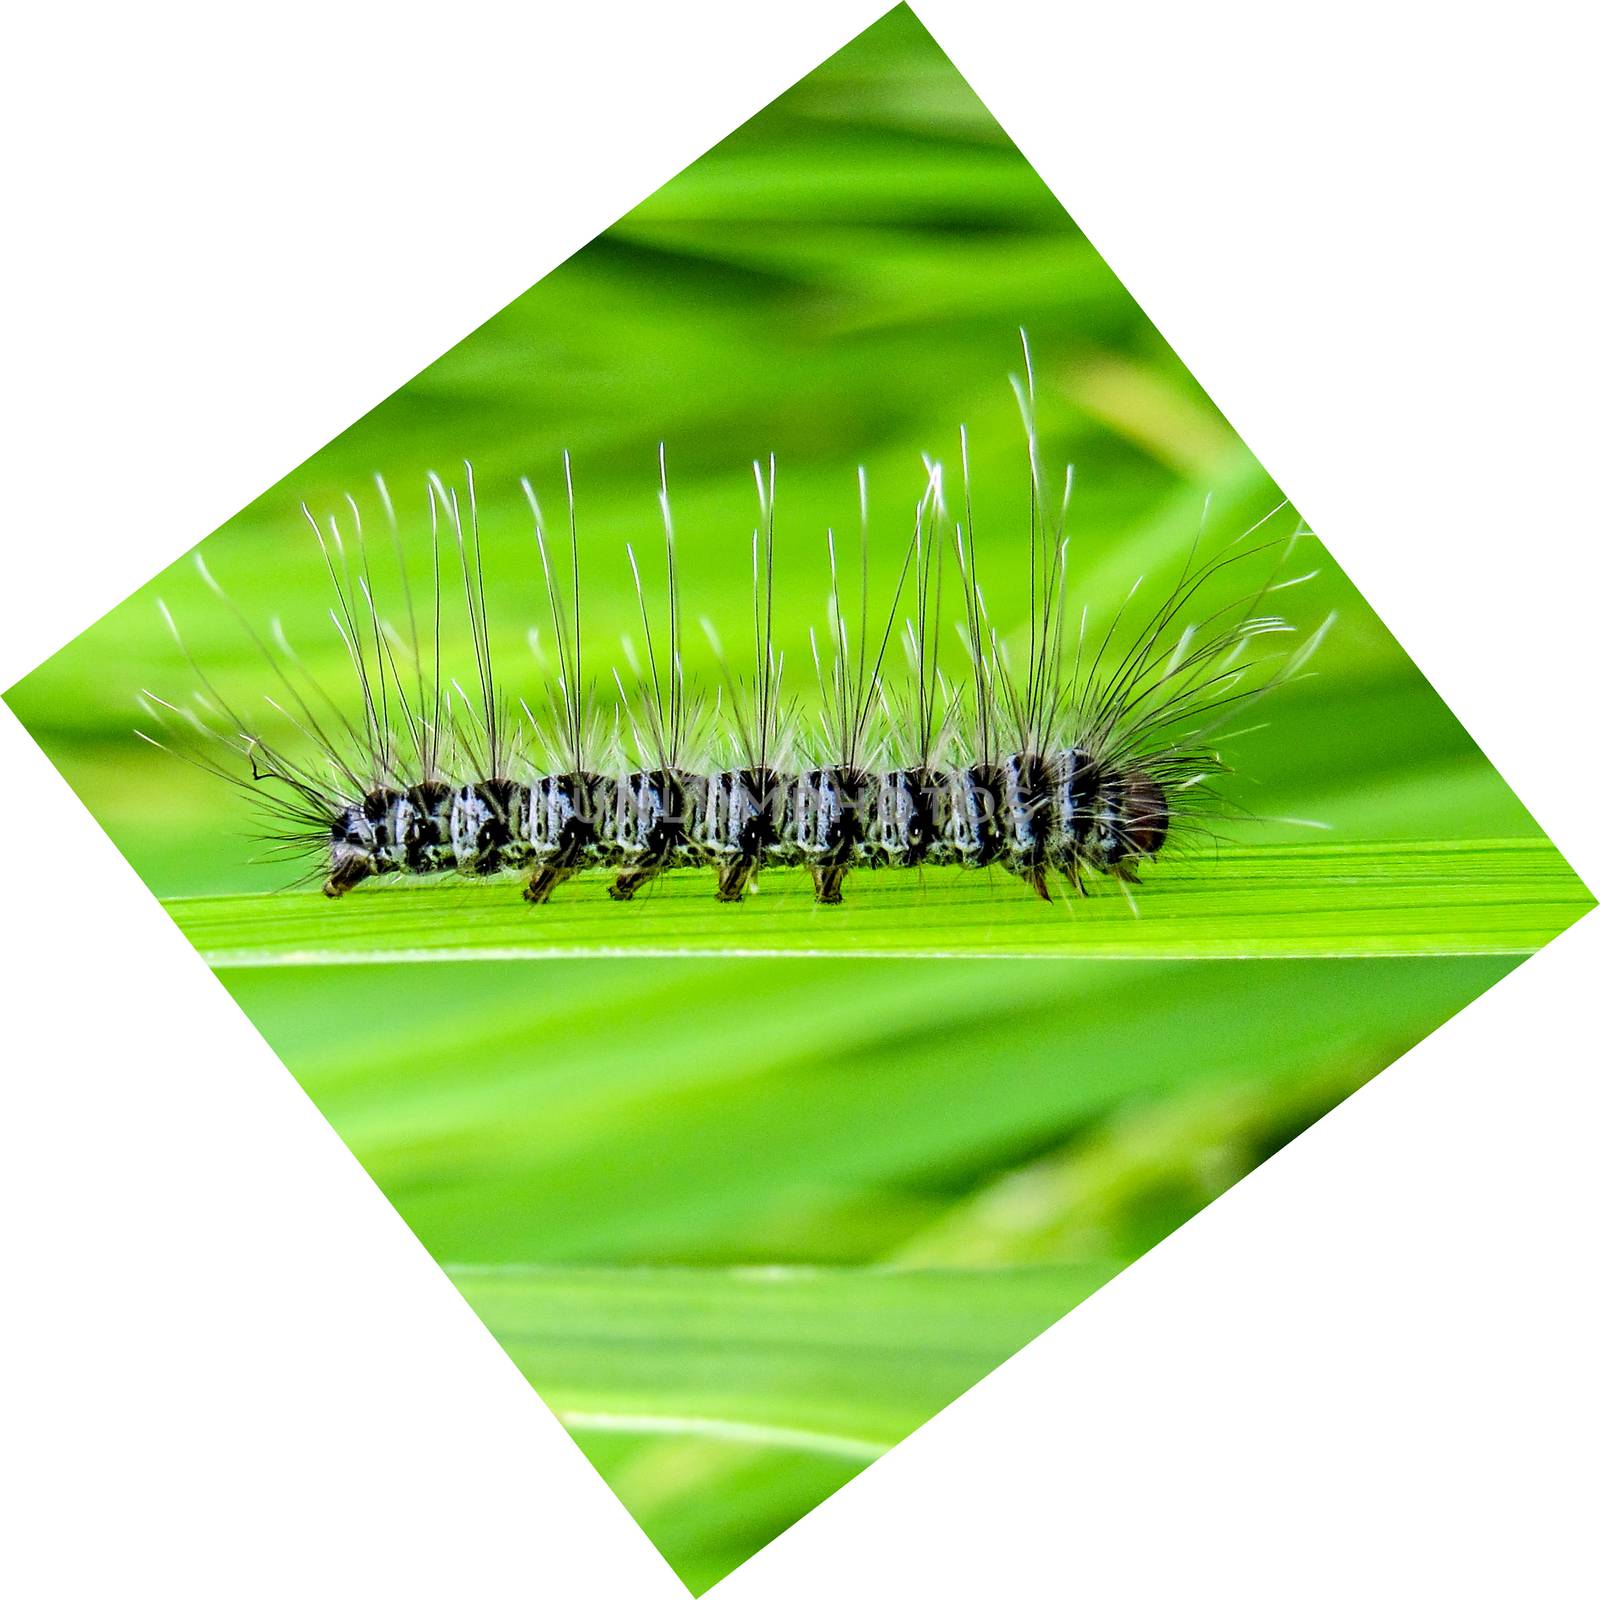 Diamond shaped image of a black and white caterpillar on a green leaf in the village. by lalam